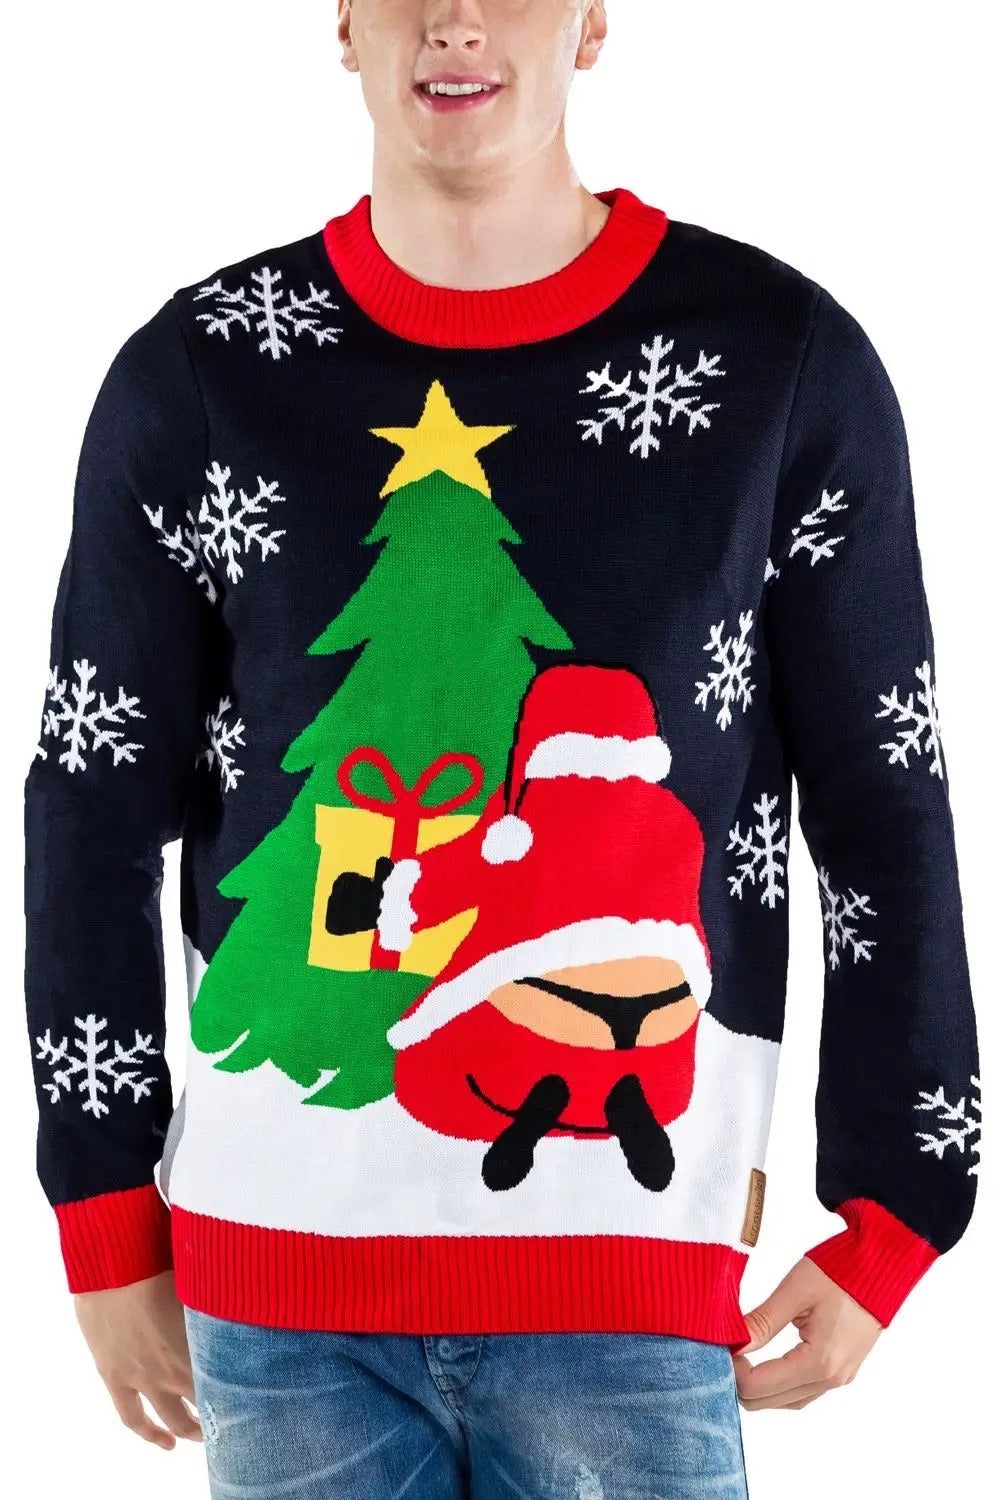 Santa's Whale Tail Christmas Sweater